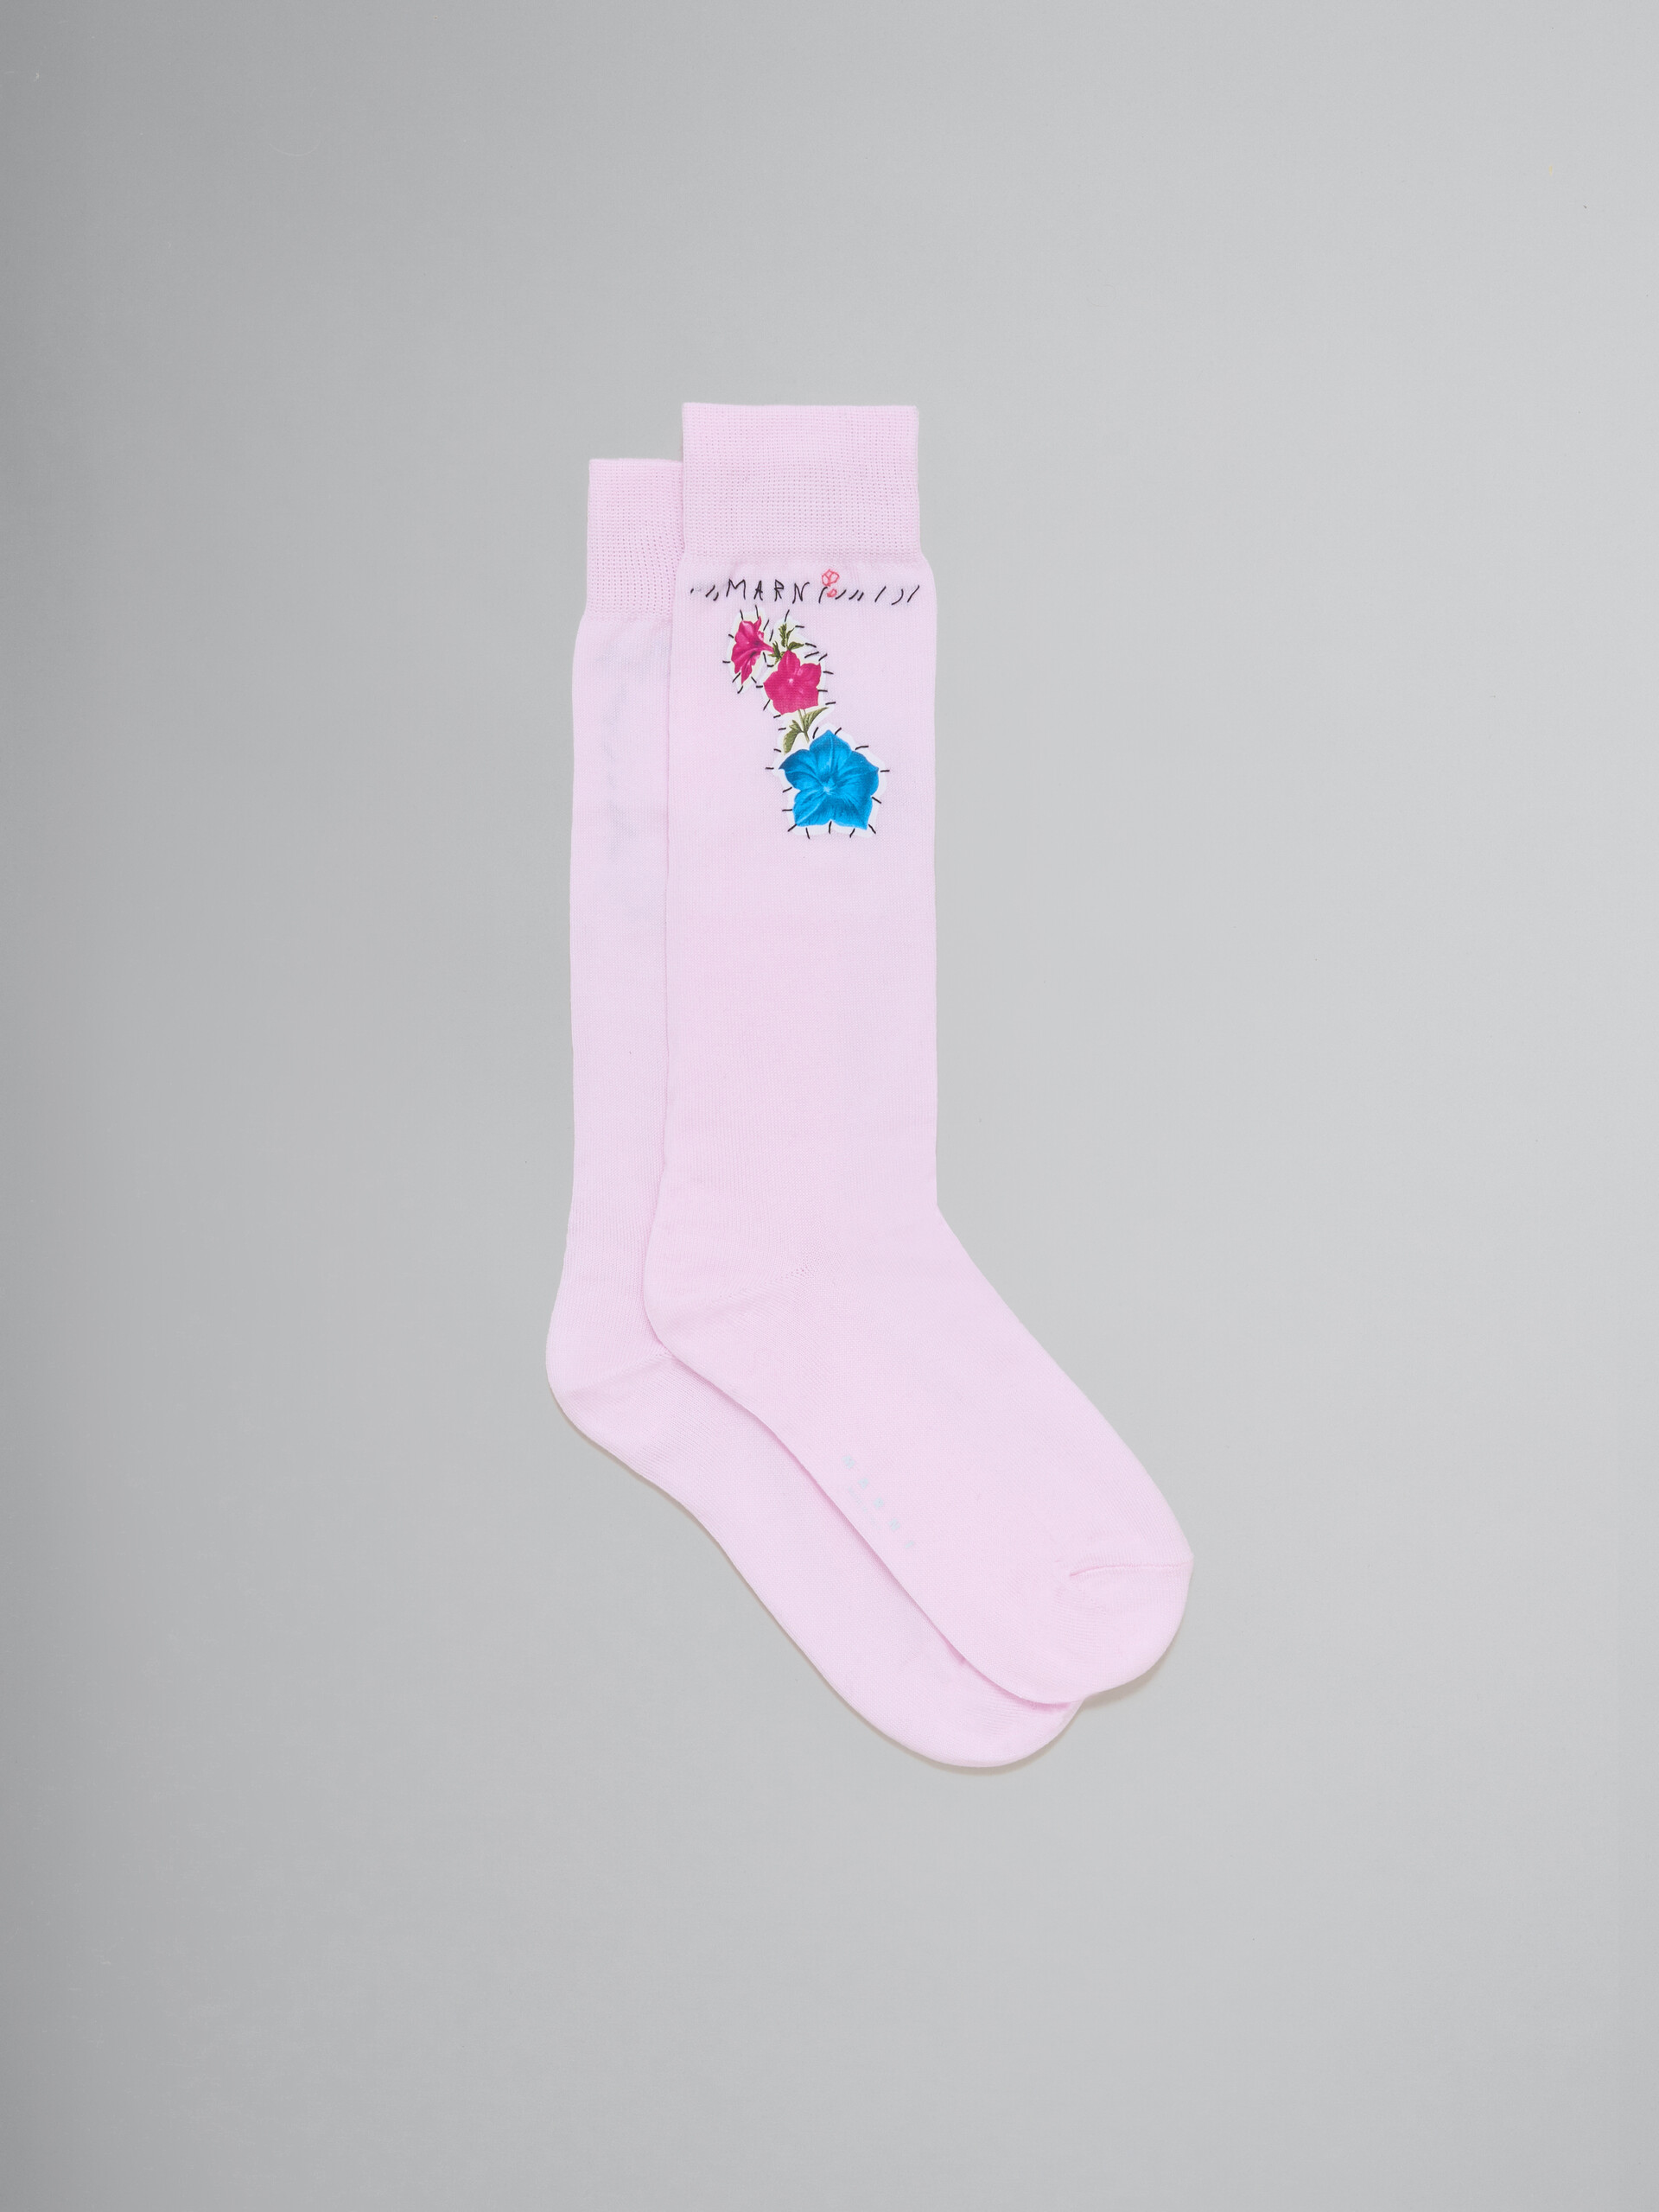 Pink cotton socks with flower patches - Socks - Image 1